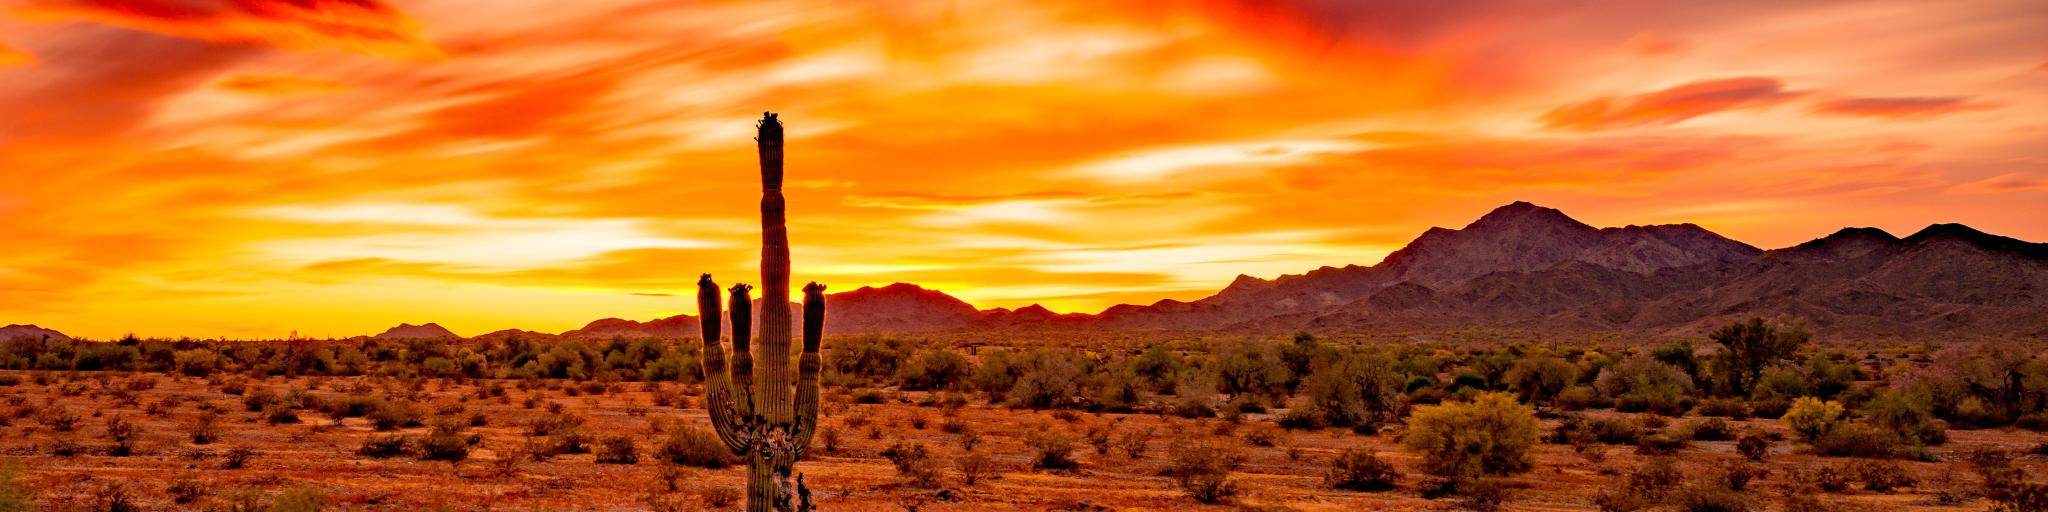 Single cactus in the desert with red and orange sunset